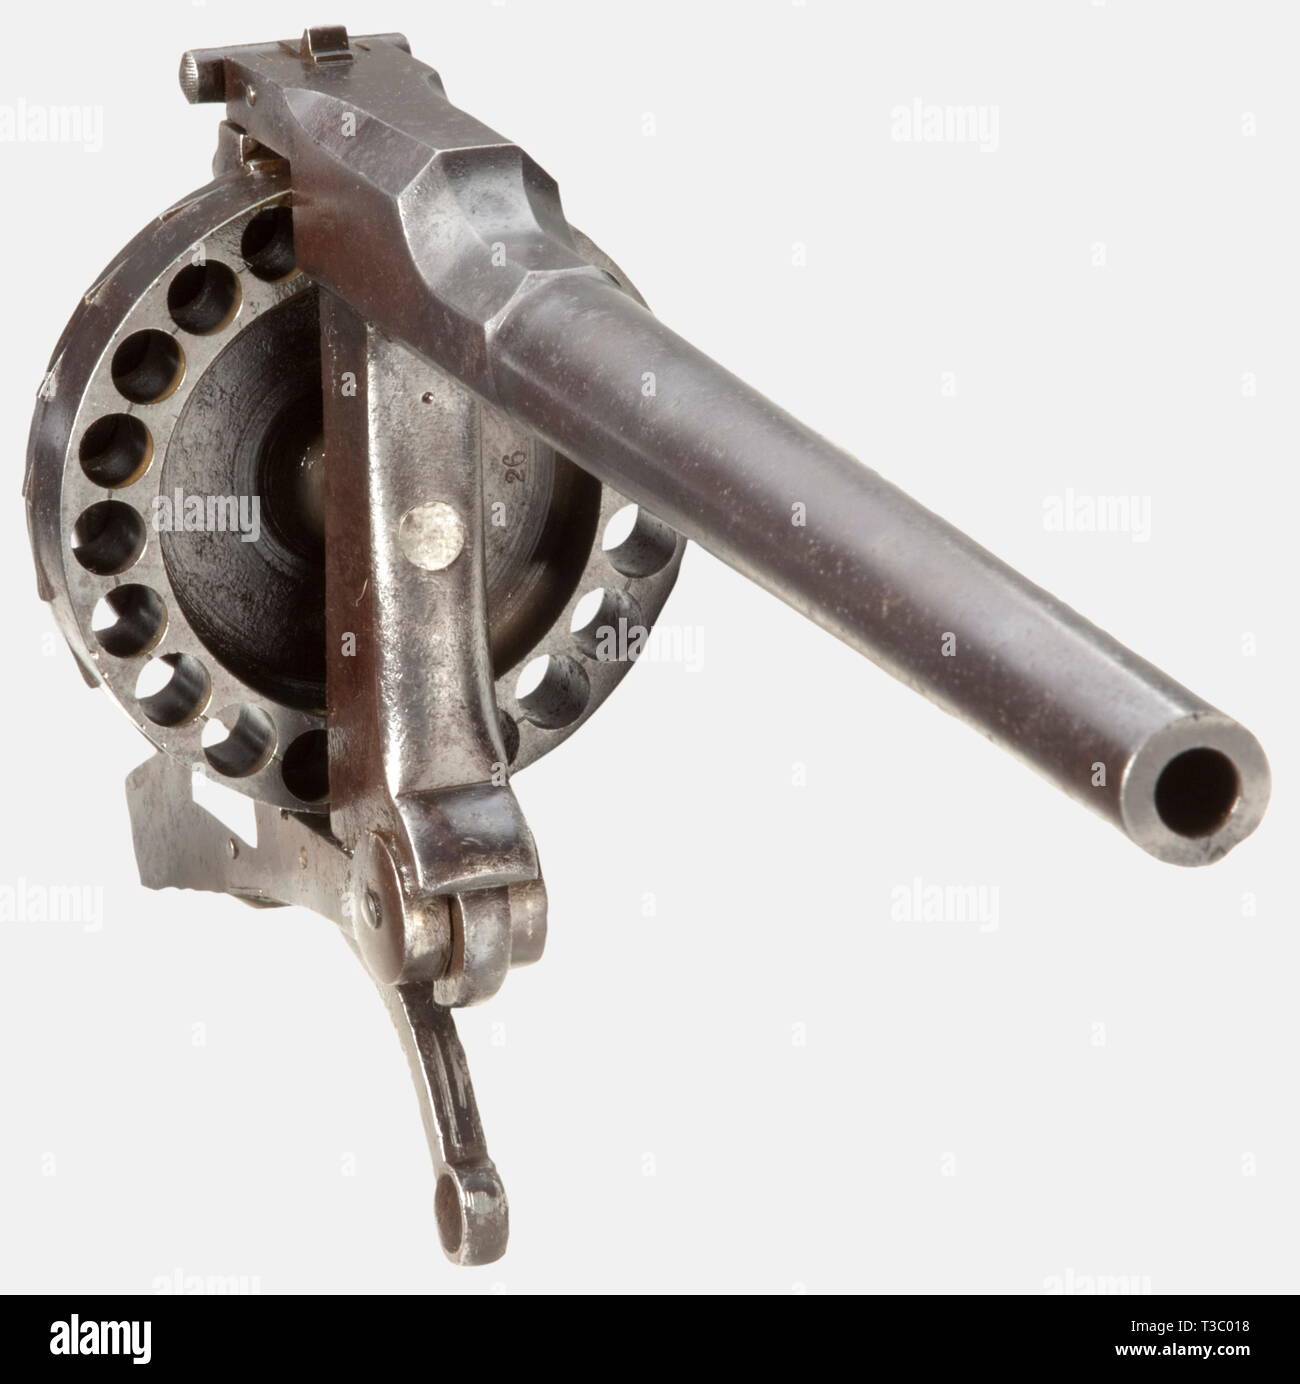 A barricade revolver., Ca. 11 mm calibre. No. 26. 20-shot. Proof mark: double crown/'U'. Barrel length 32.5 cm. Total length 43 cm. Weight 3200 g. Barrel and cylinder tip up. Spring-loaded firing pin. Stained, pitted in places. Presumably, the revolver was clamped and then fired by means of a cord or equivalent. Very rare interesting piece from trench warfare during the First World War. Erwerbsscheinpflichtig. historic, historical, 19th century, German Empire, Germany, Imperial, object, objects, stills, clipping, cut out, cut-out, cut-outs, firea, Additional-Rights-Clearance-Info-Not-Available Stock Photo